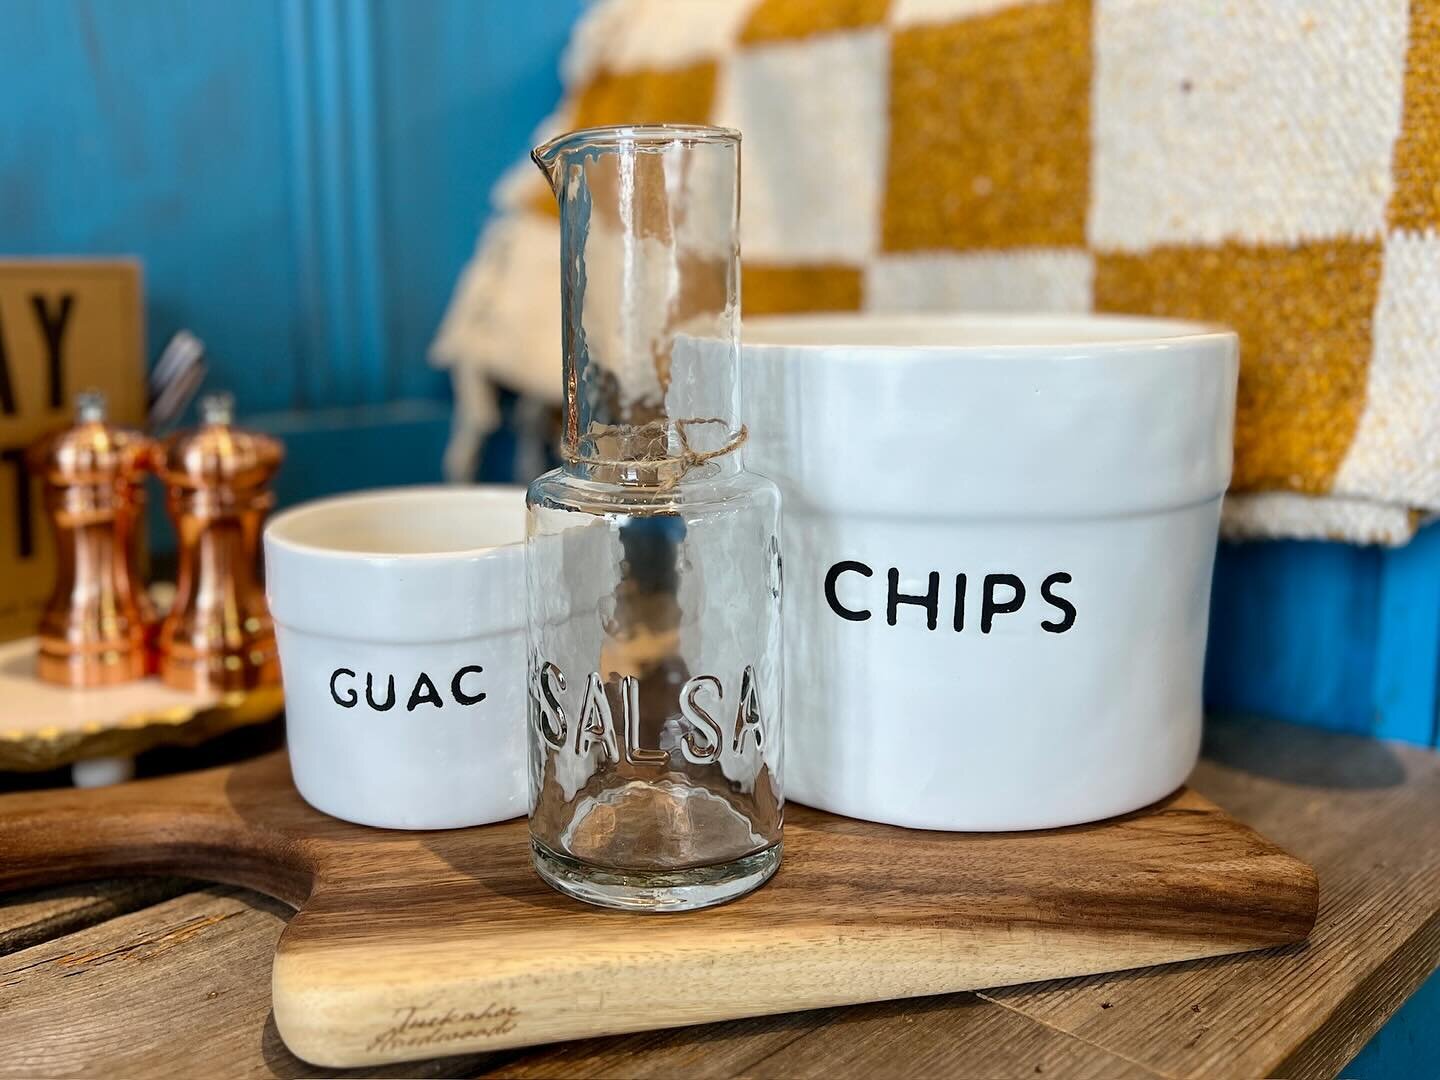 Are you team guac🥑 or salsa? Either way, we have all your entertaining or hostess gift needs for the big game! Open today from 11-4. 
#ggprettythings #superbowl #entertaining #hostessgift